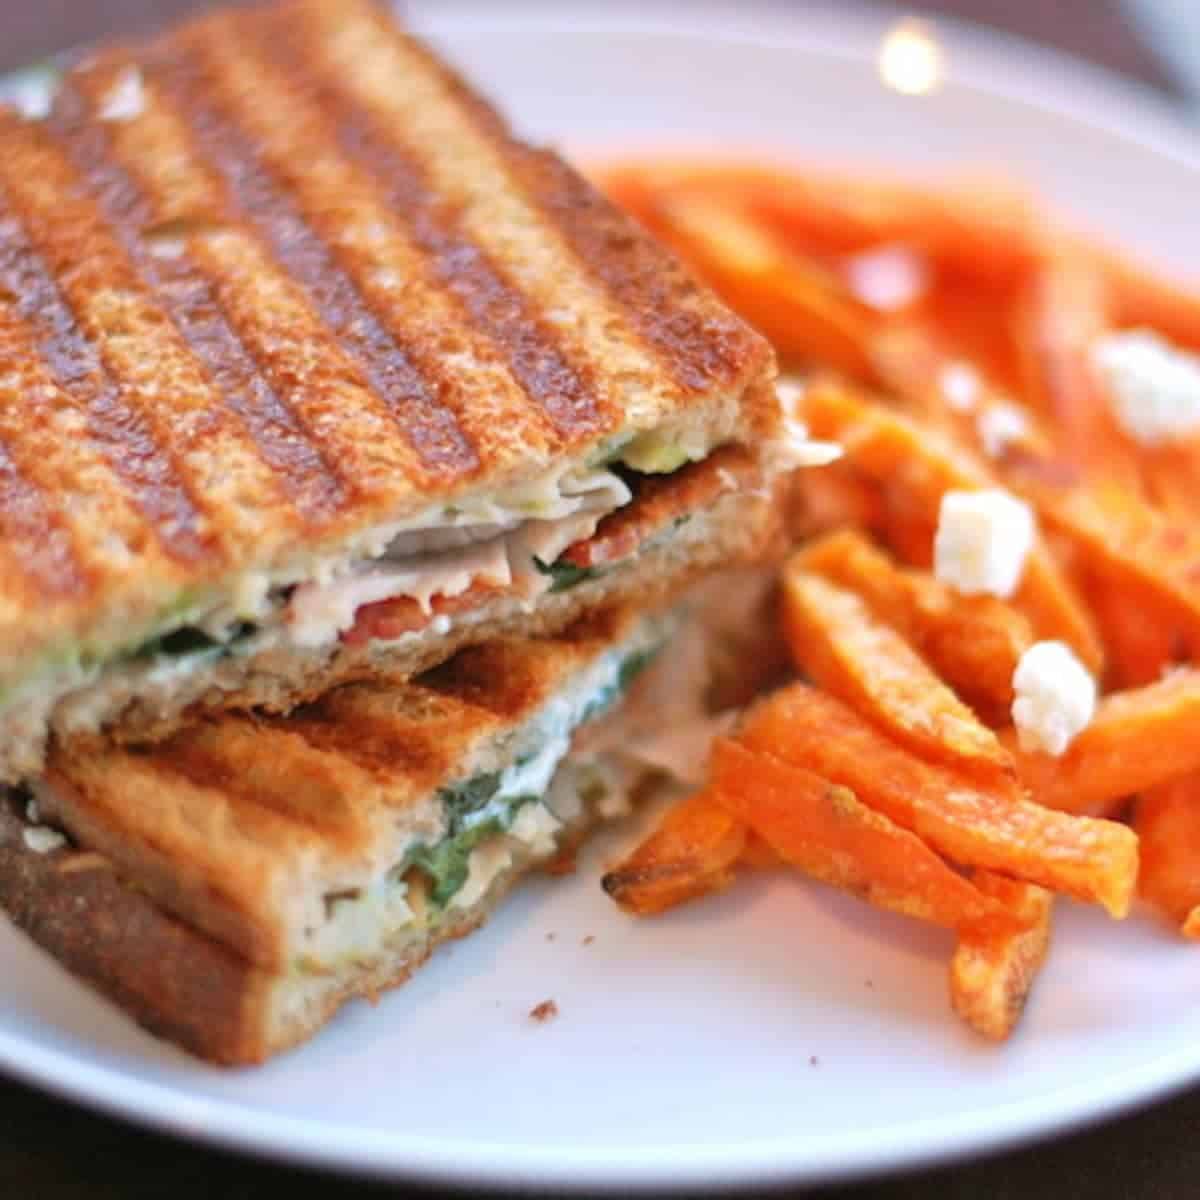 Gorgonzola and bacon panini with spinach on a plate with sweet potato fries.